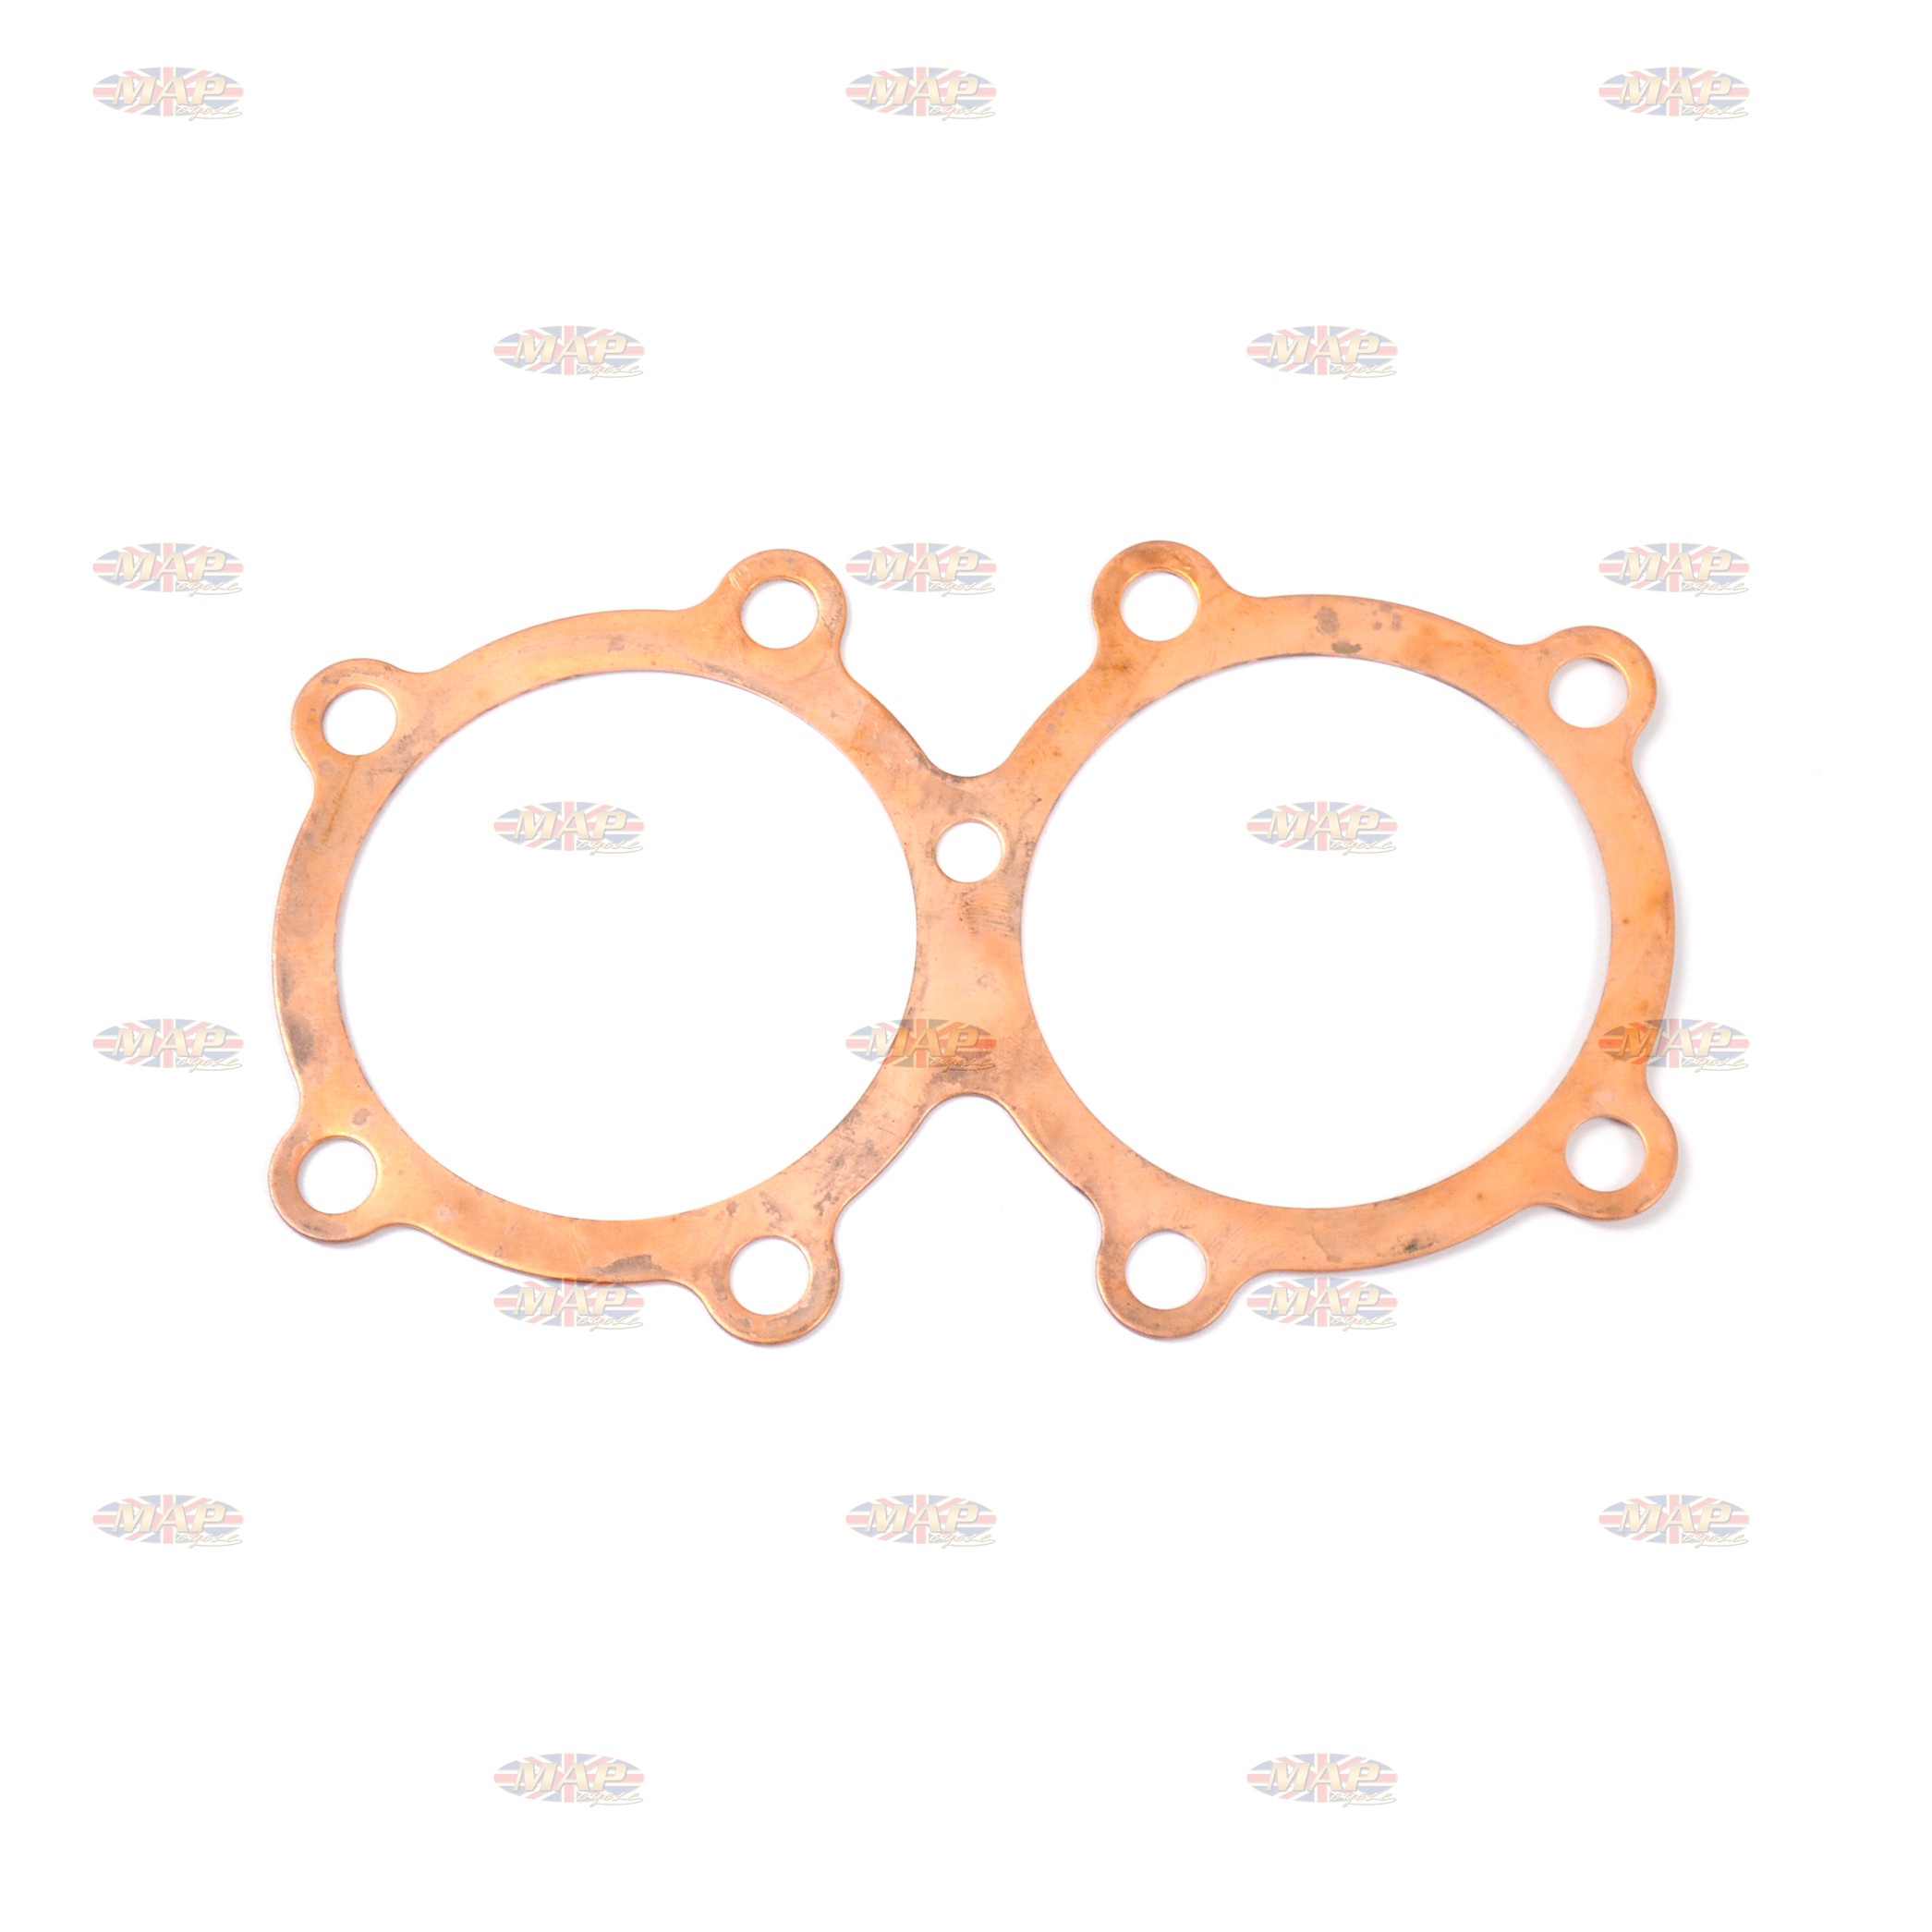 Triumph T120 750cc Head Gasket for MAP Alloy Cylinder Kit - Up to 3.010" MAP9080